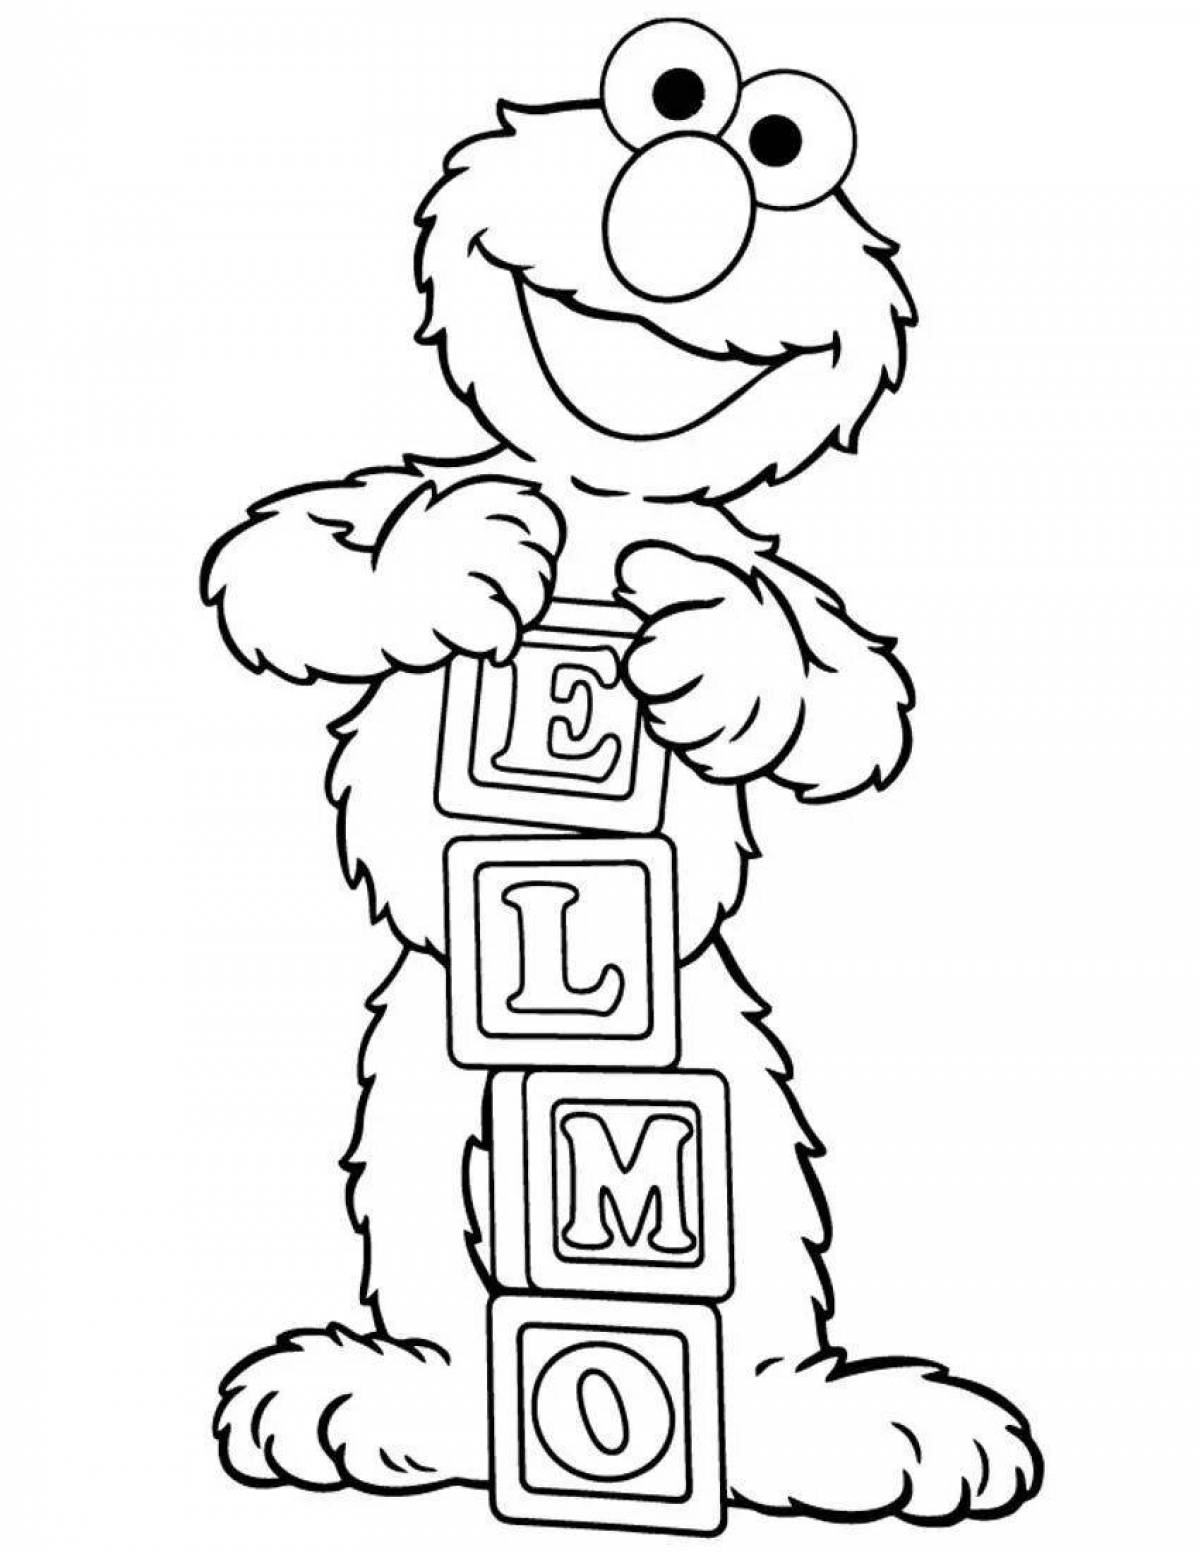 Coloring page charming sesame street